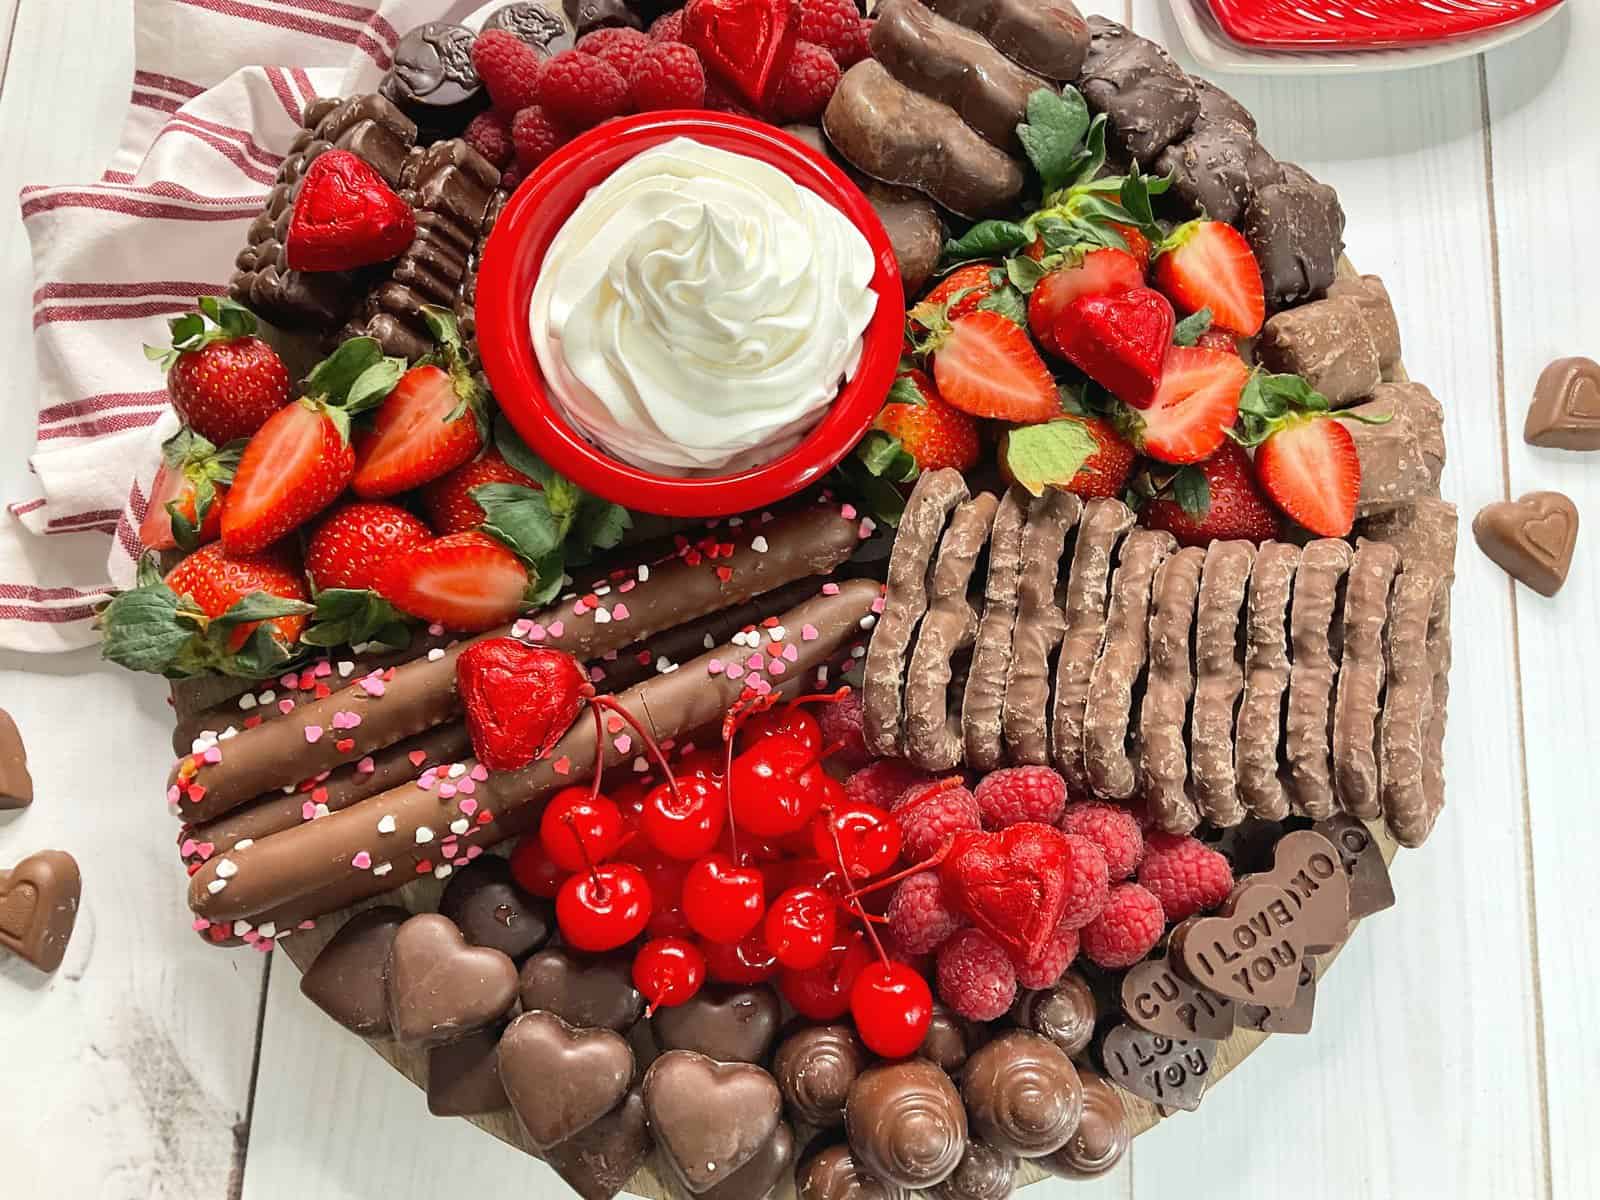 close up photo showing completed snack board with fruit, chocolate hearts, whip cream, chocolate covered pretzels, and chocolate hearts.